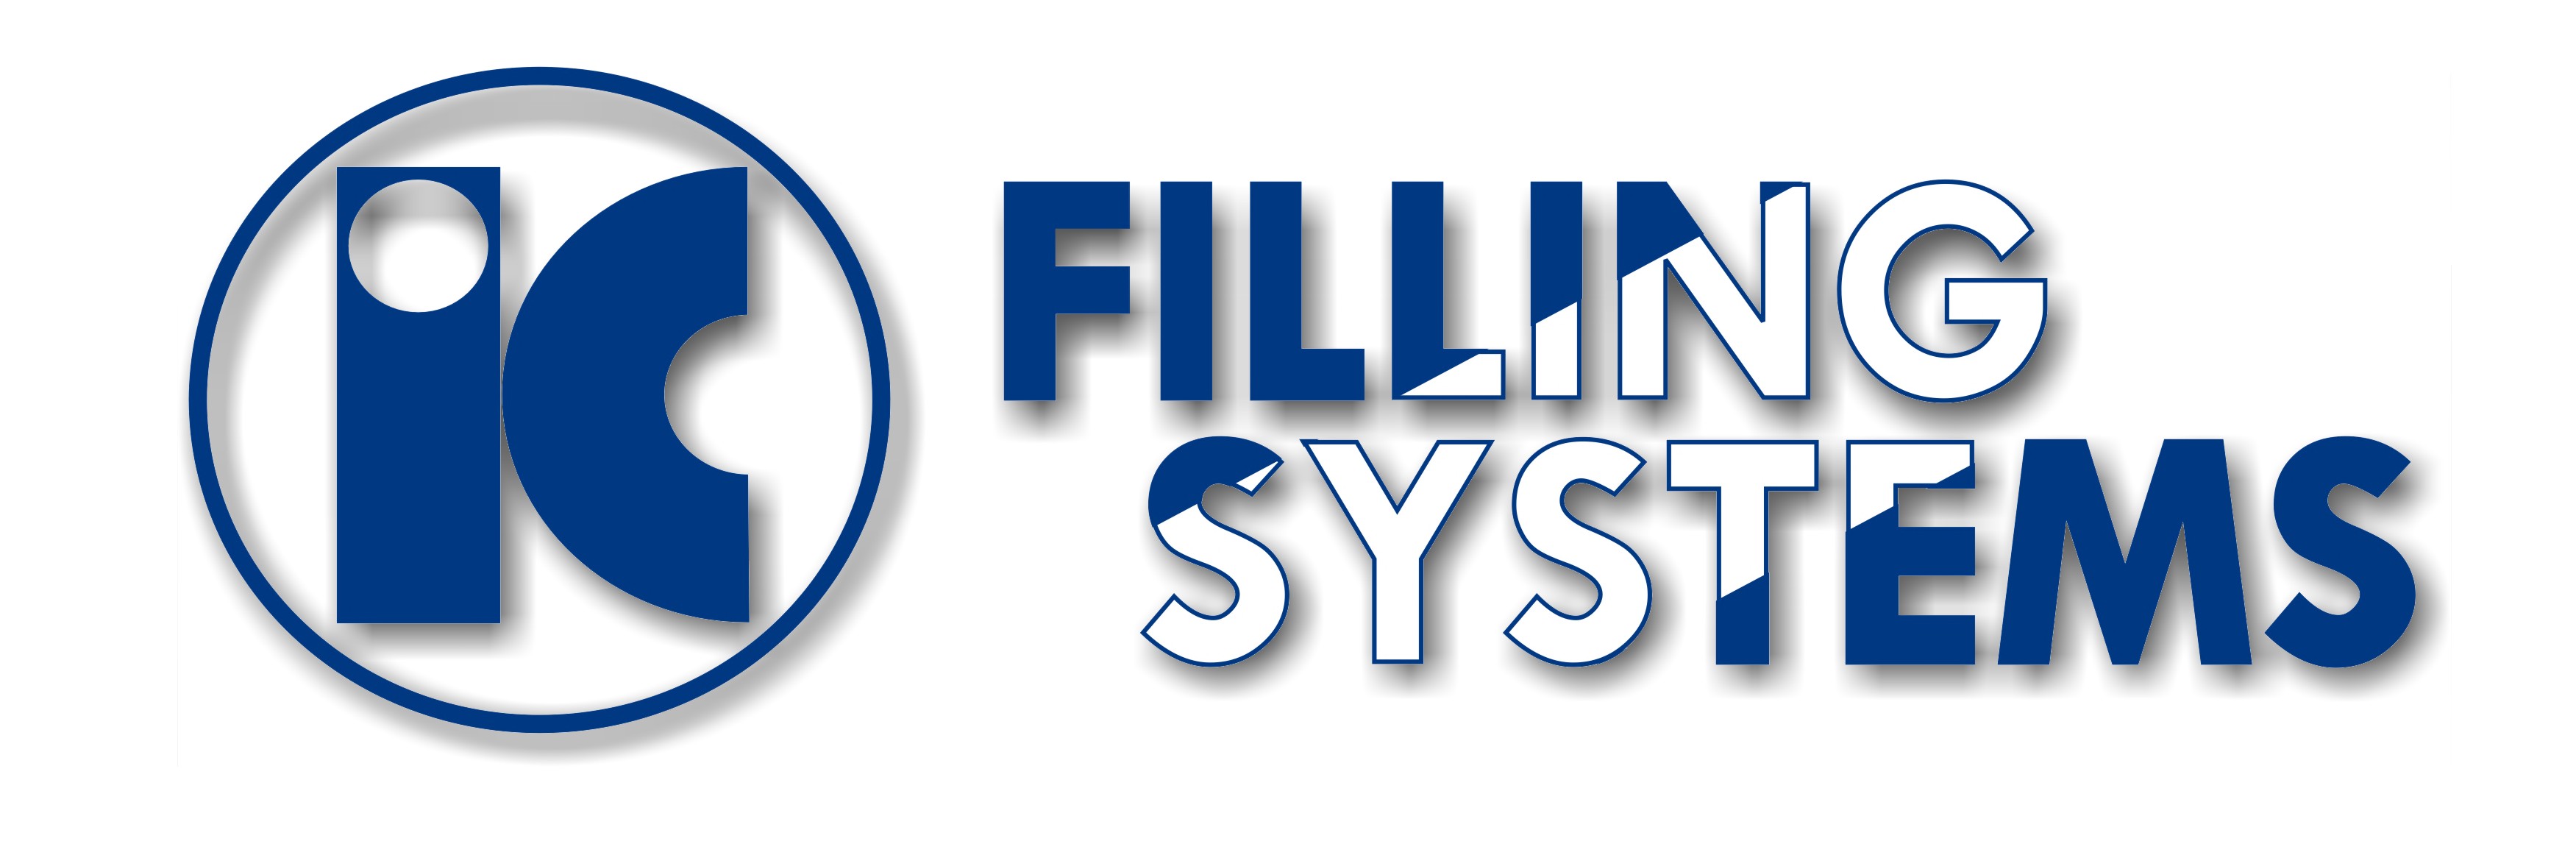 I.C. Filling Systems